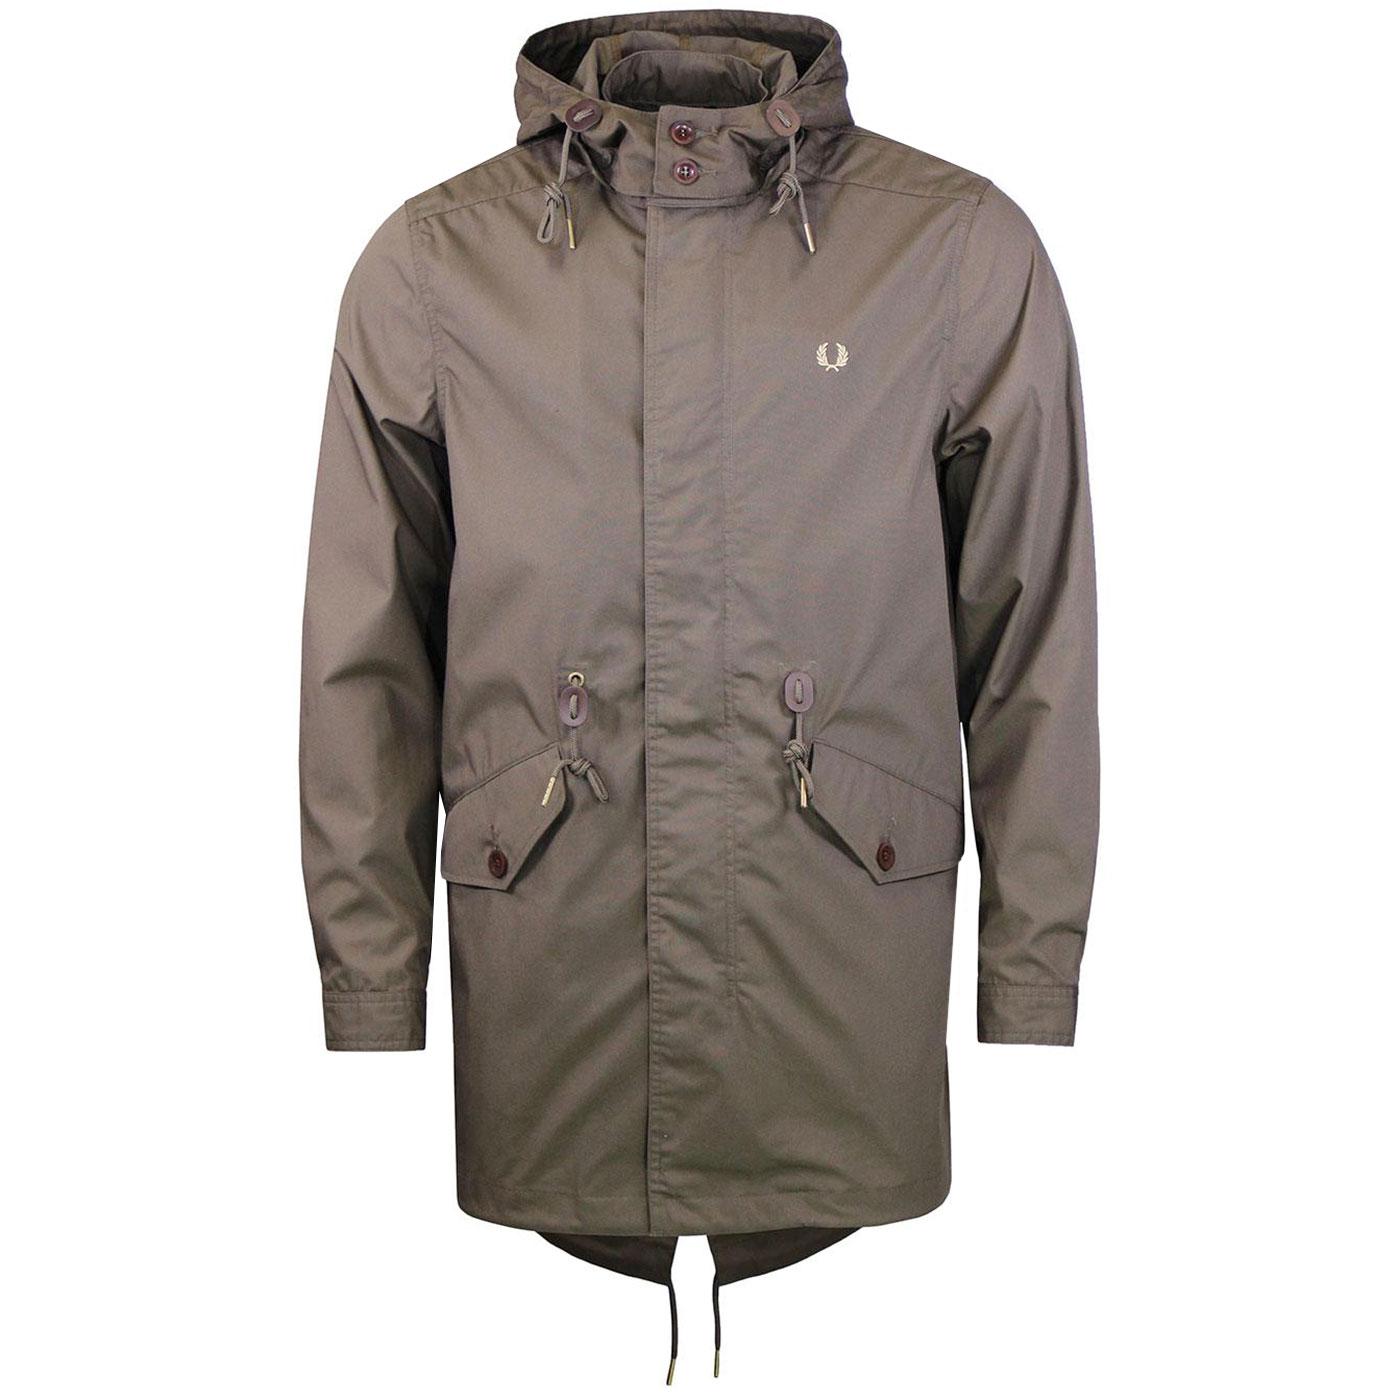 FRED PERRY Classic 60's Mod Fishtail Parka Jacket